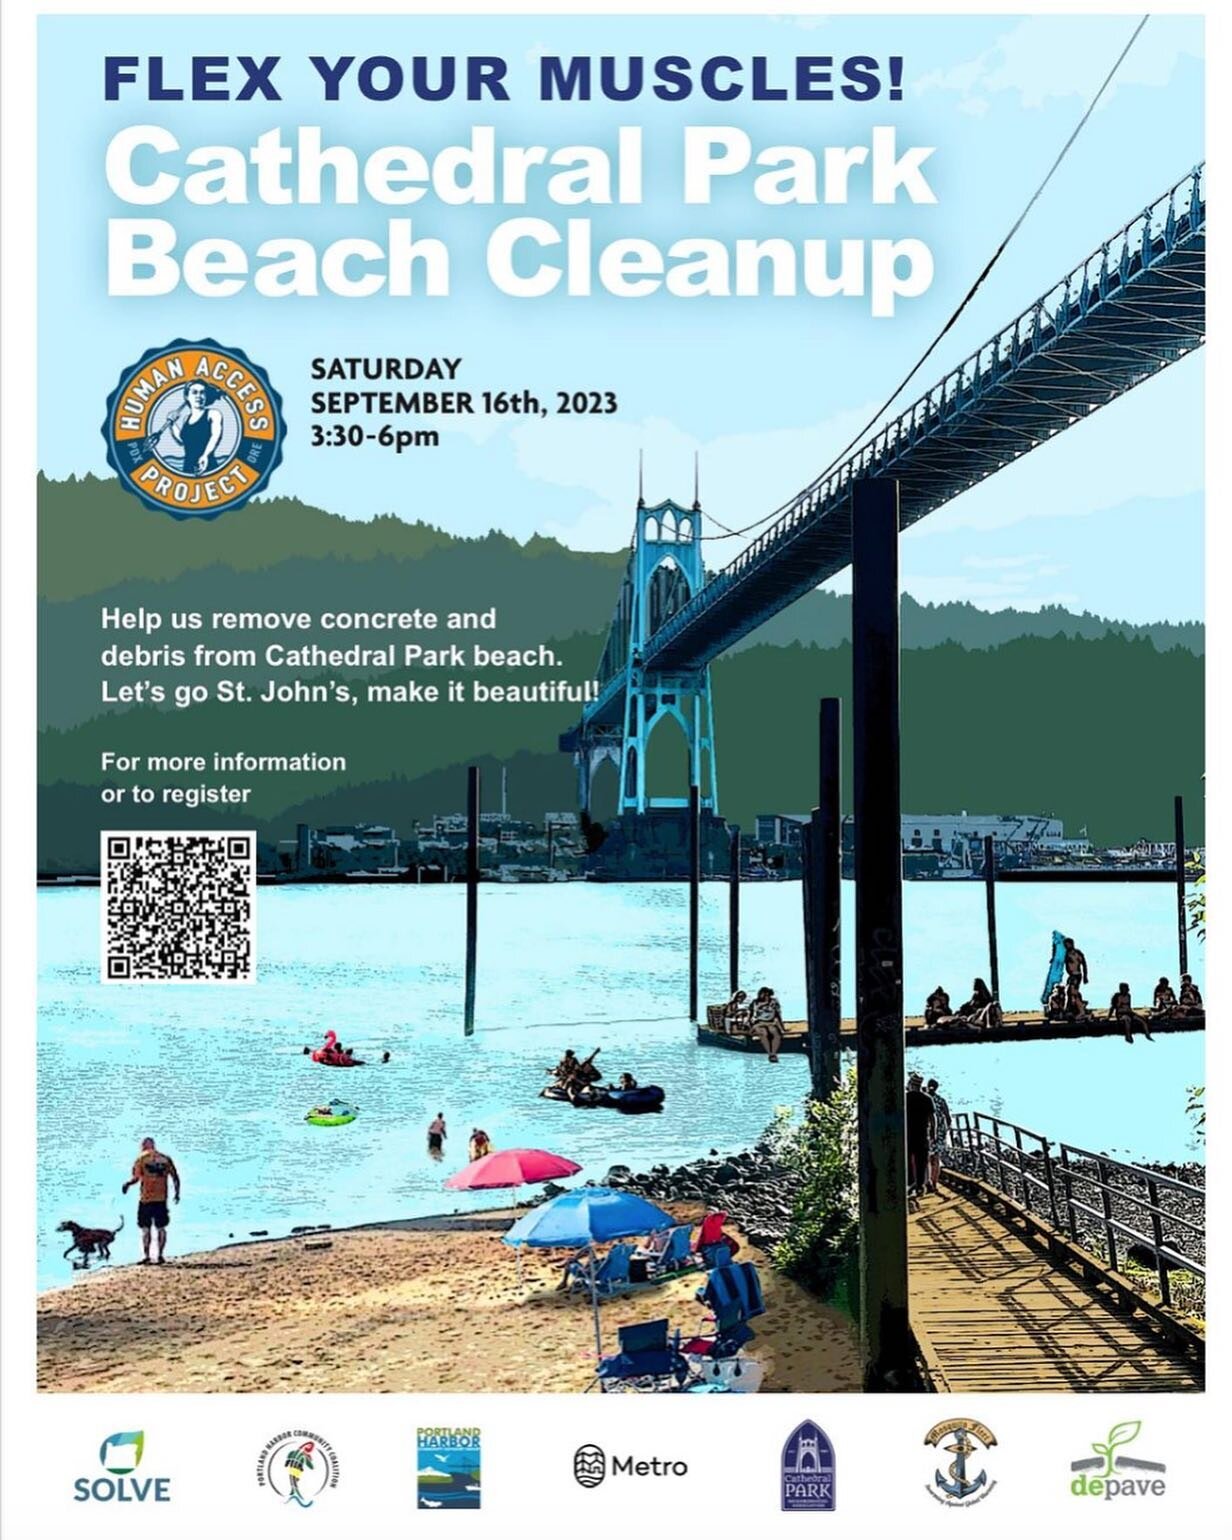 We&rsquo;re partnering with our friends at @humanaccessproject and other local organizations for an epic beach cleanup at Cathedral Park in St. John&rsquo;s on Saturday, September 16th! Our goal is to remove 25-40 tons of concrete, rubble and rip-wra